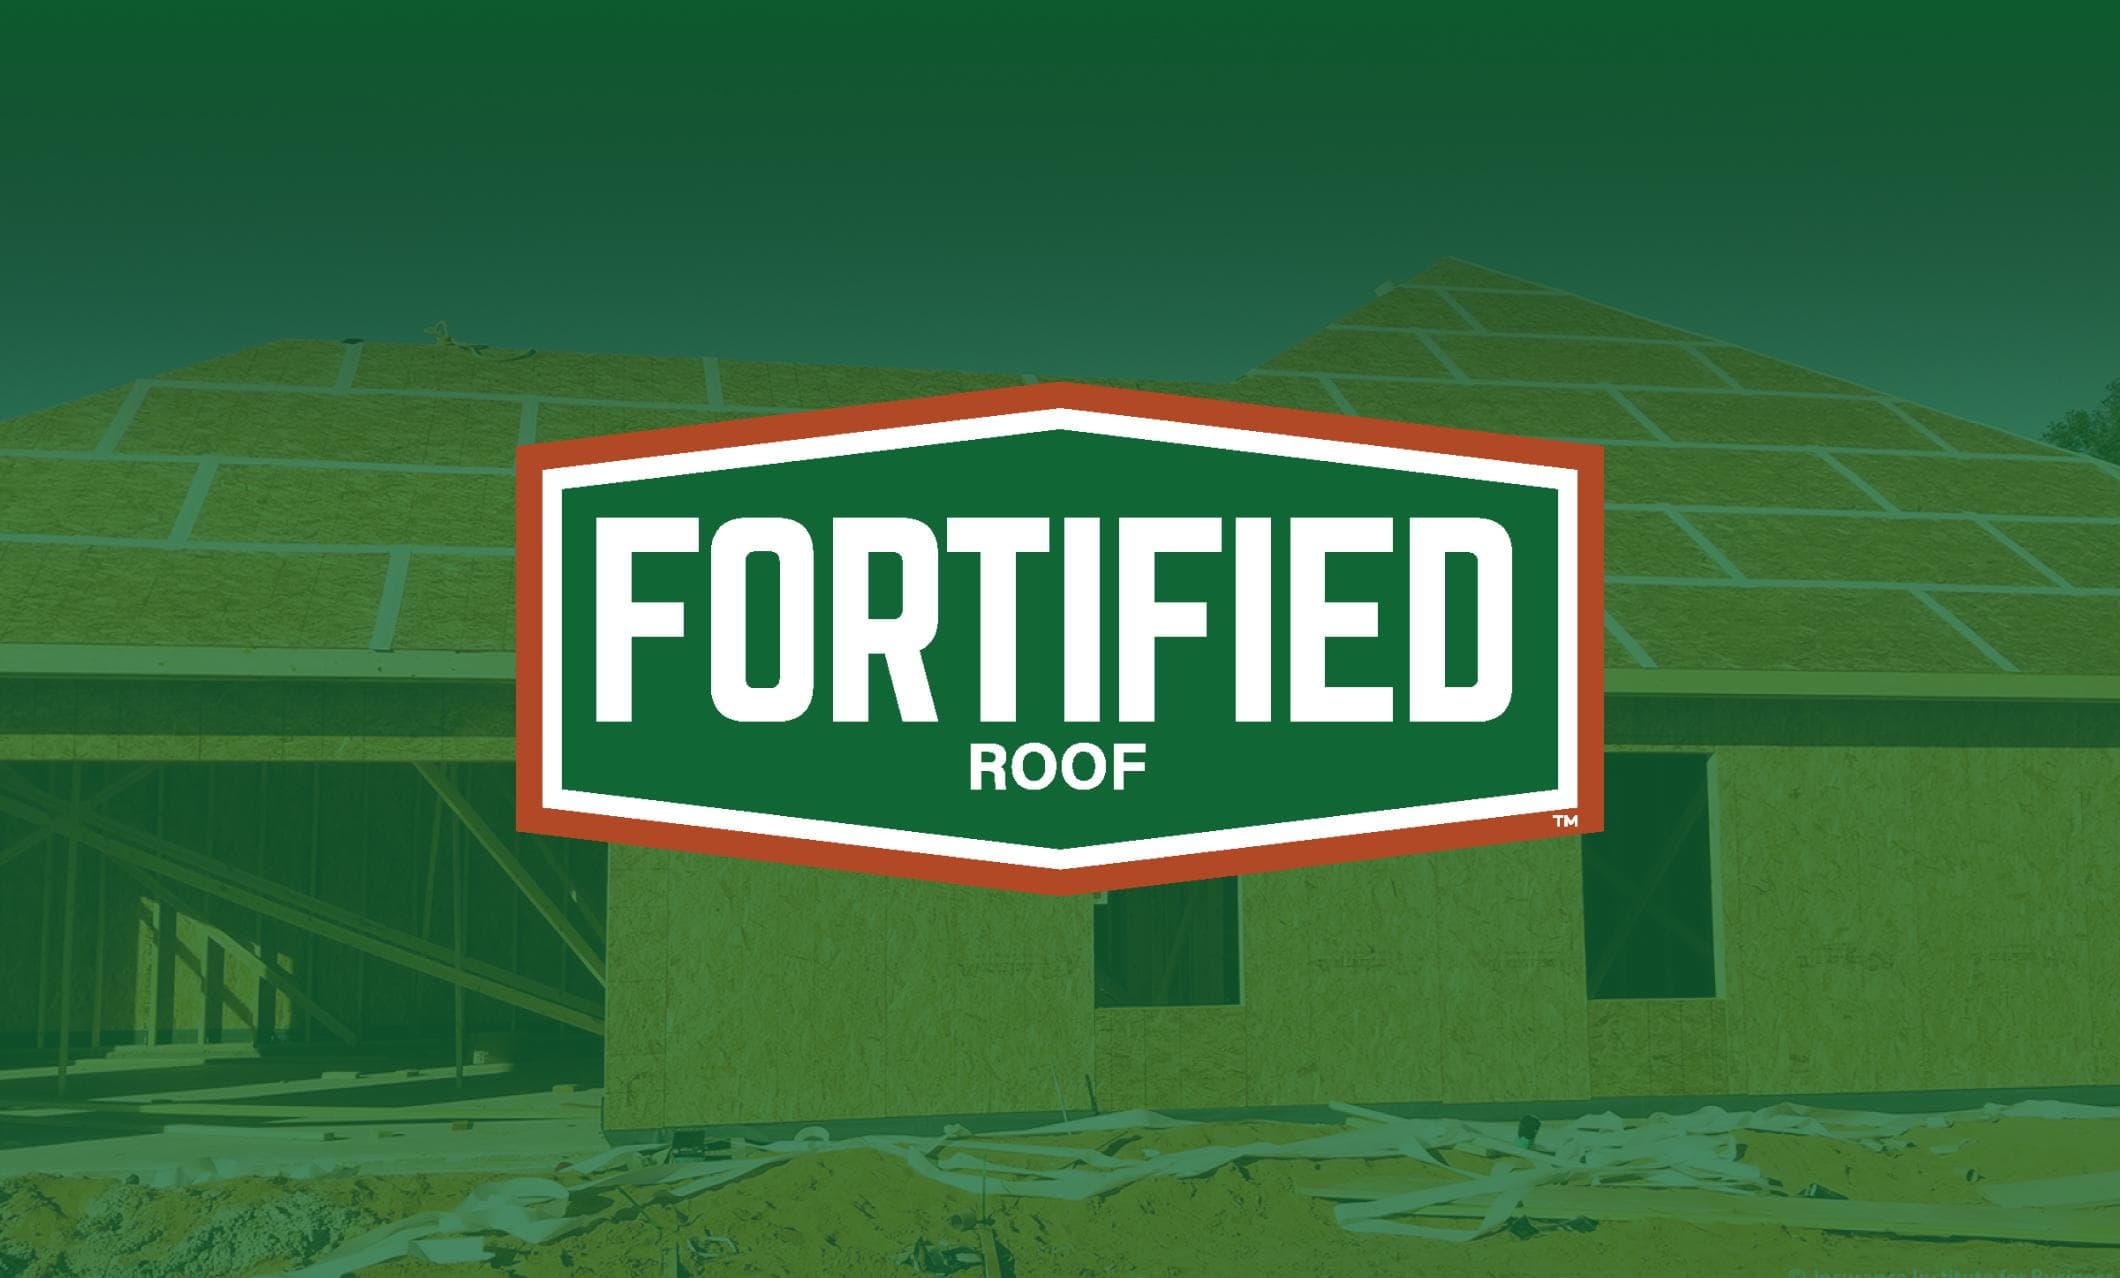 Fortified Roofing Deckk | Fortified Roofing